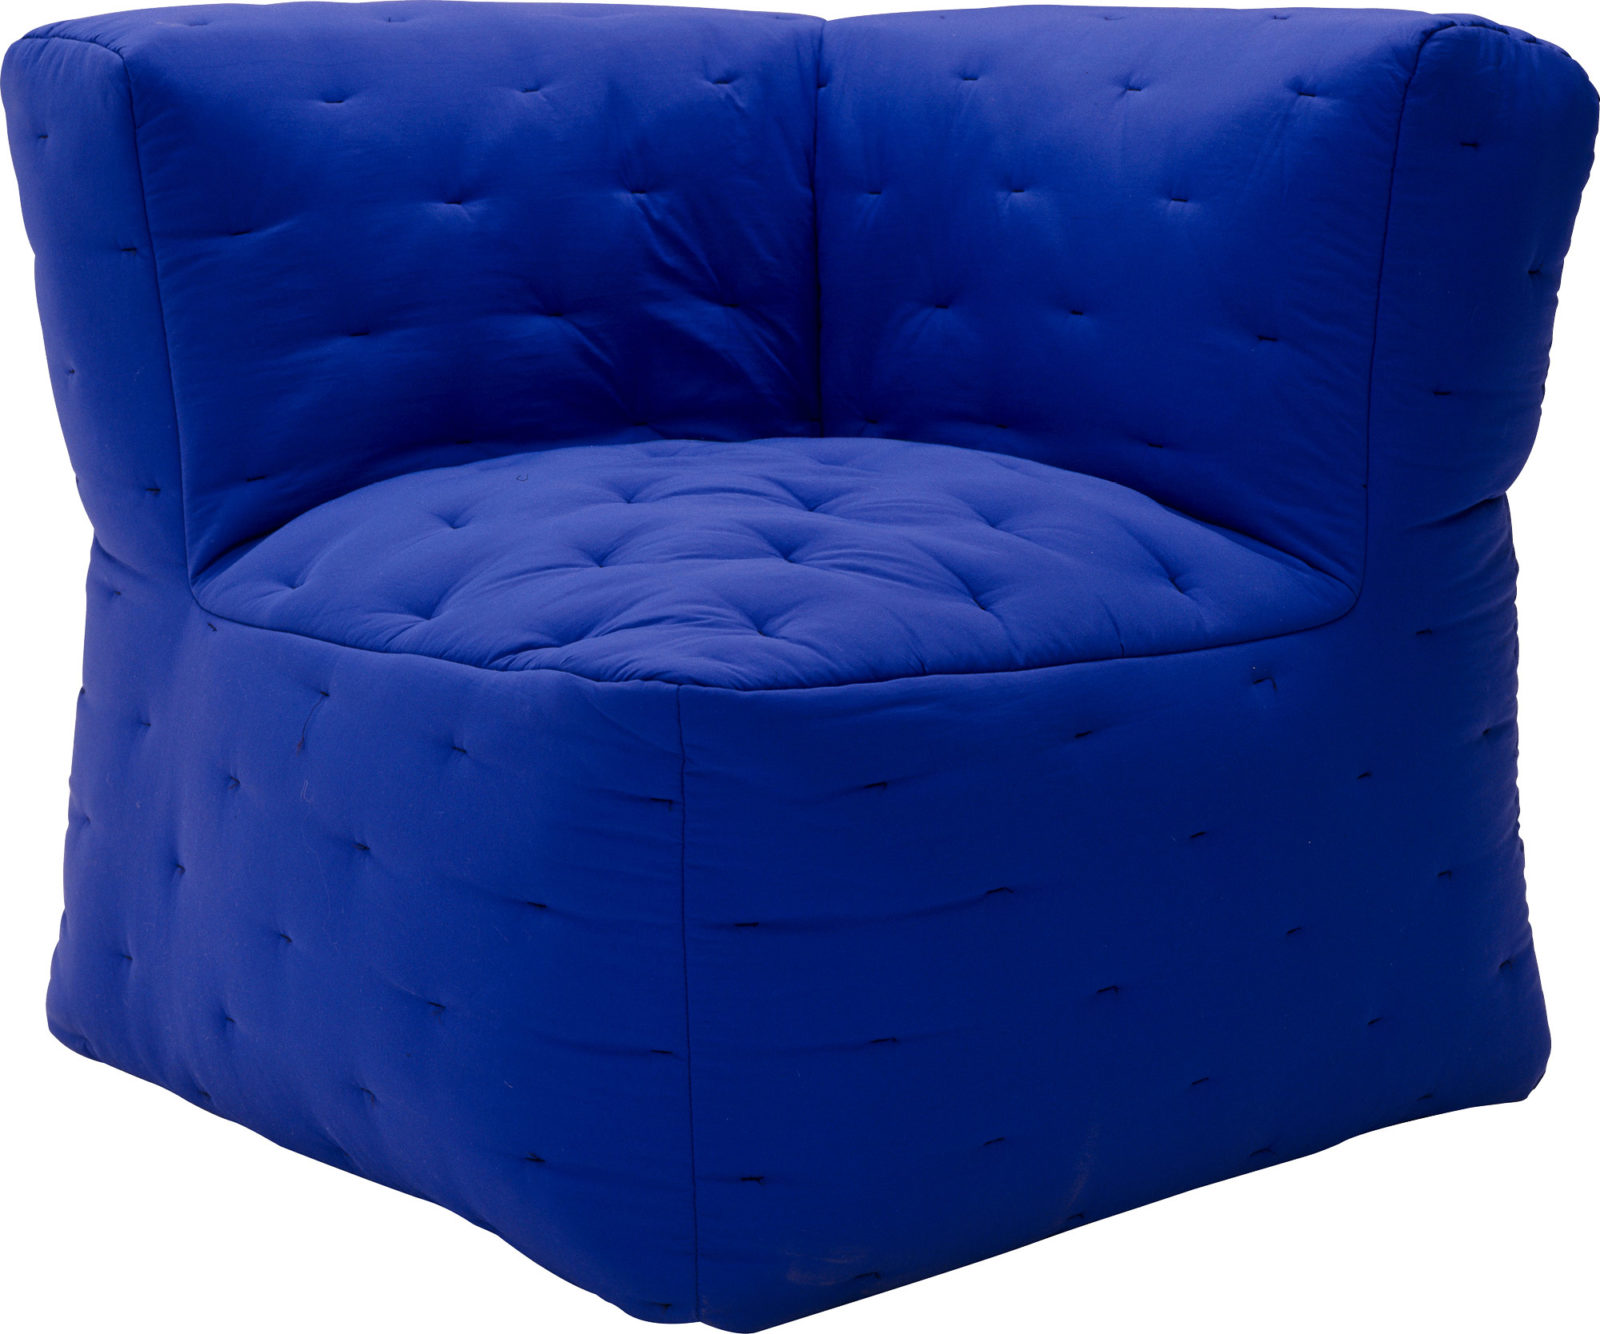 Boxy blue inflated armchair.